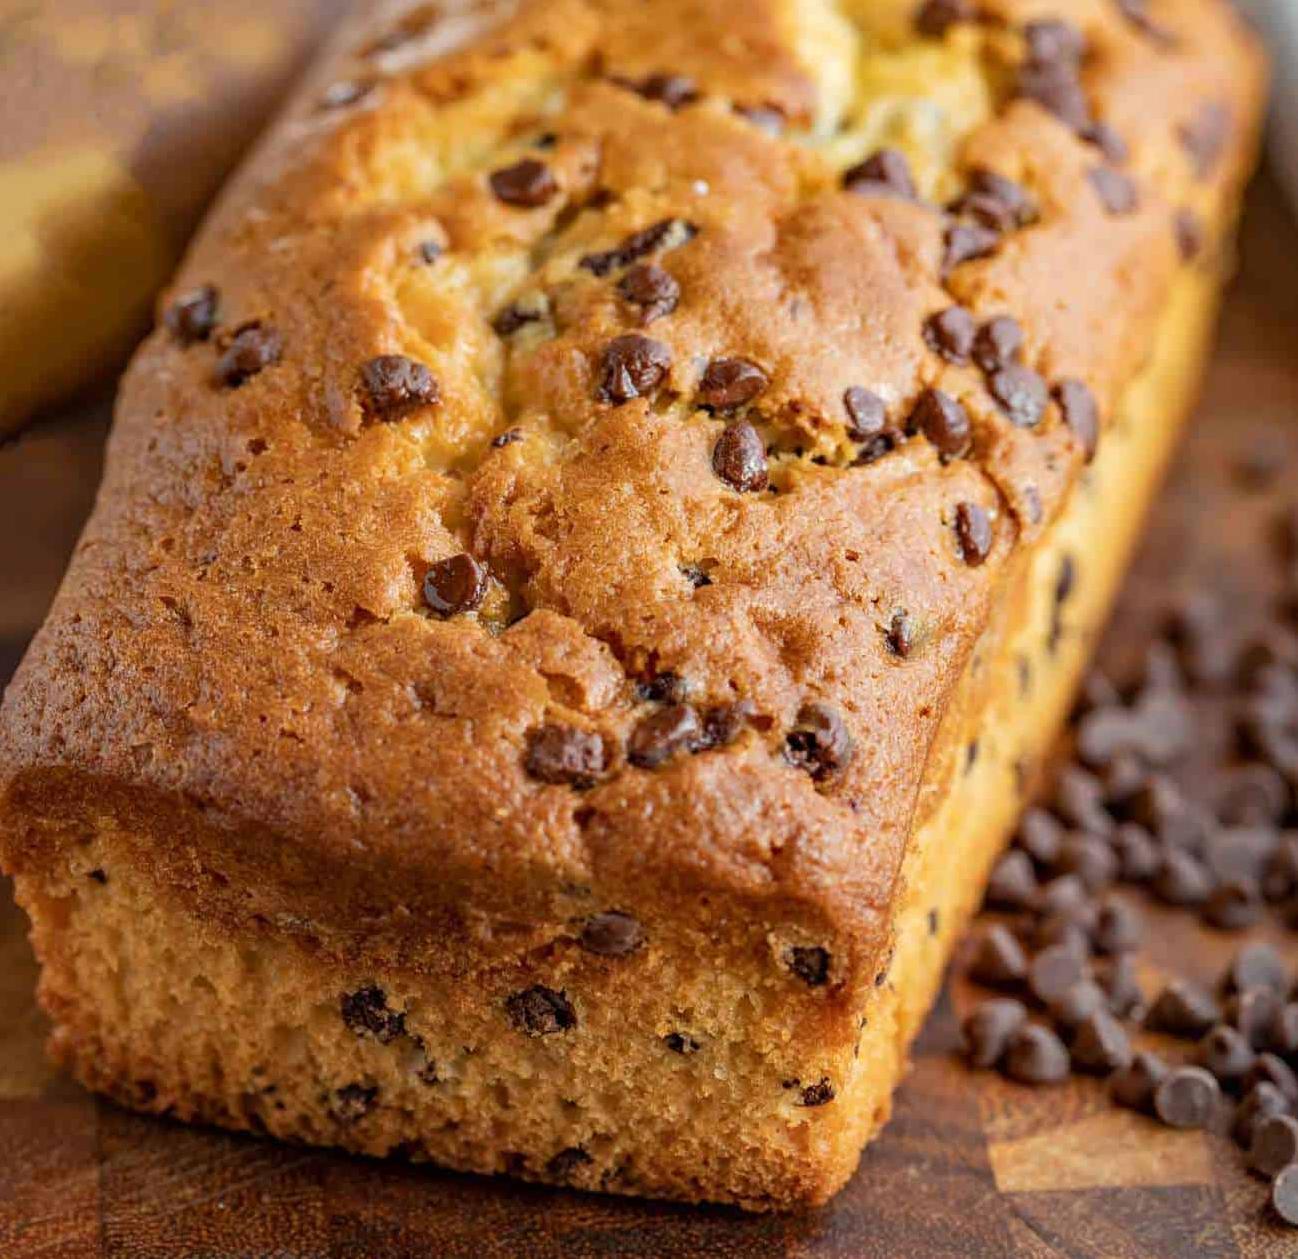  Want to treat yourself to something sweet? This fudge chip pound cake is perfect for you!